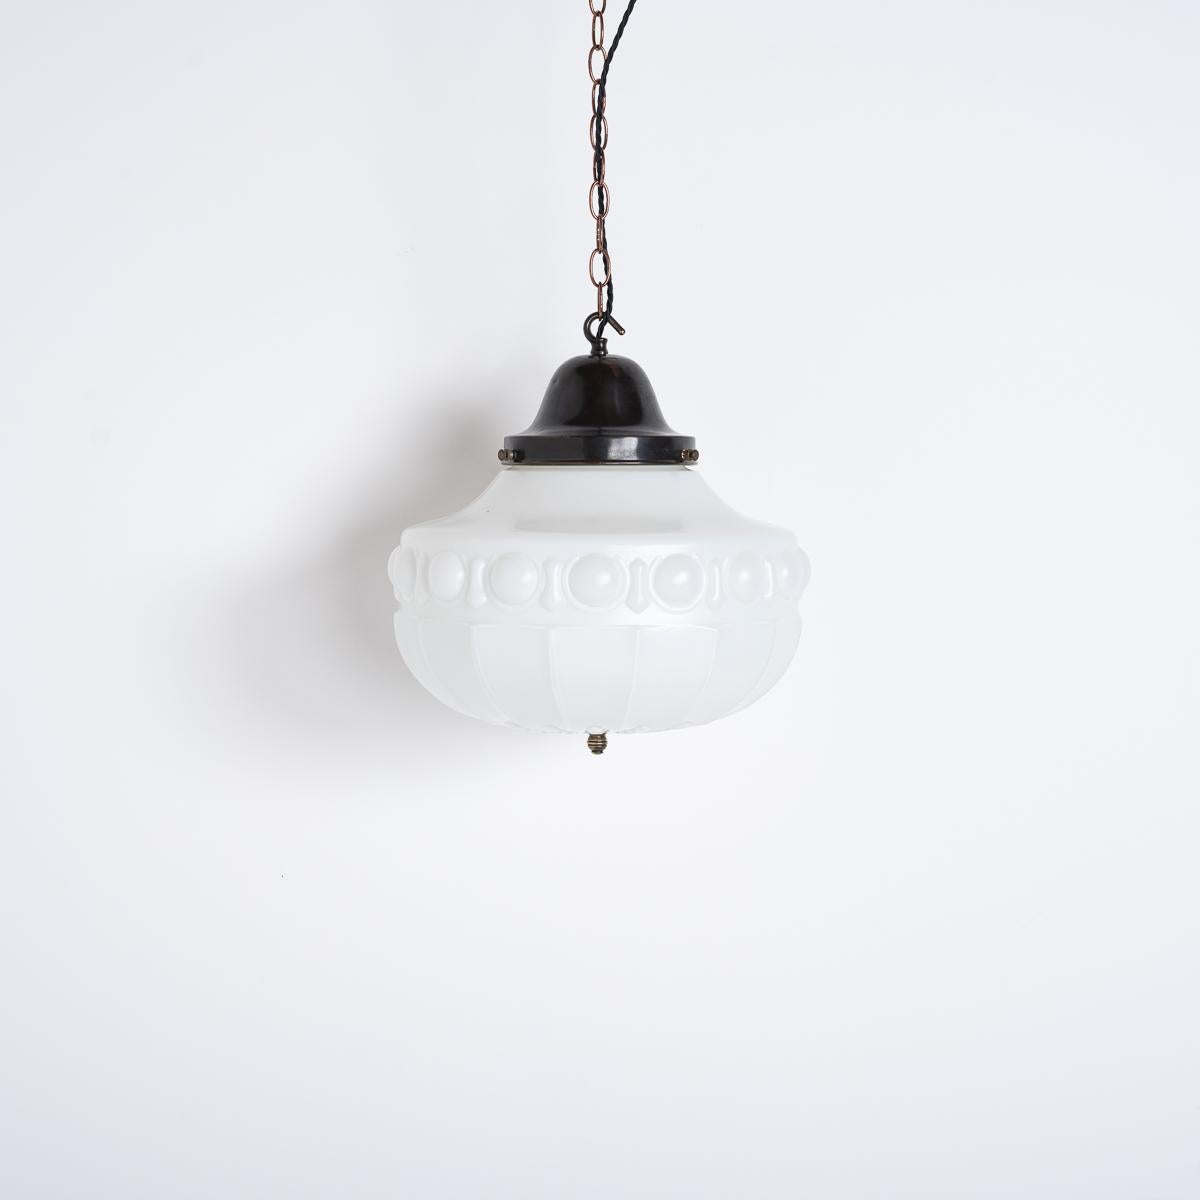 LARGE ANTIQUE DECORATIVE OPALINE PENDANT LIGHT 
The unique shape and large size of this antique opaline pendant light make it the perfect centrepiece for any room.

British made circa 1930.

The beautiful opaline moulded glass has been hand crafted